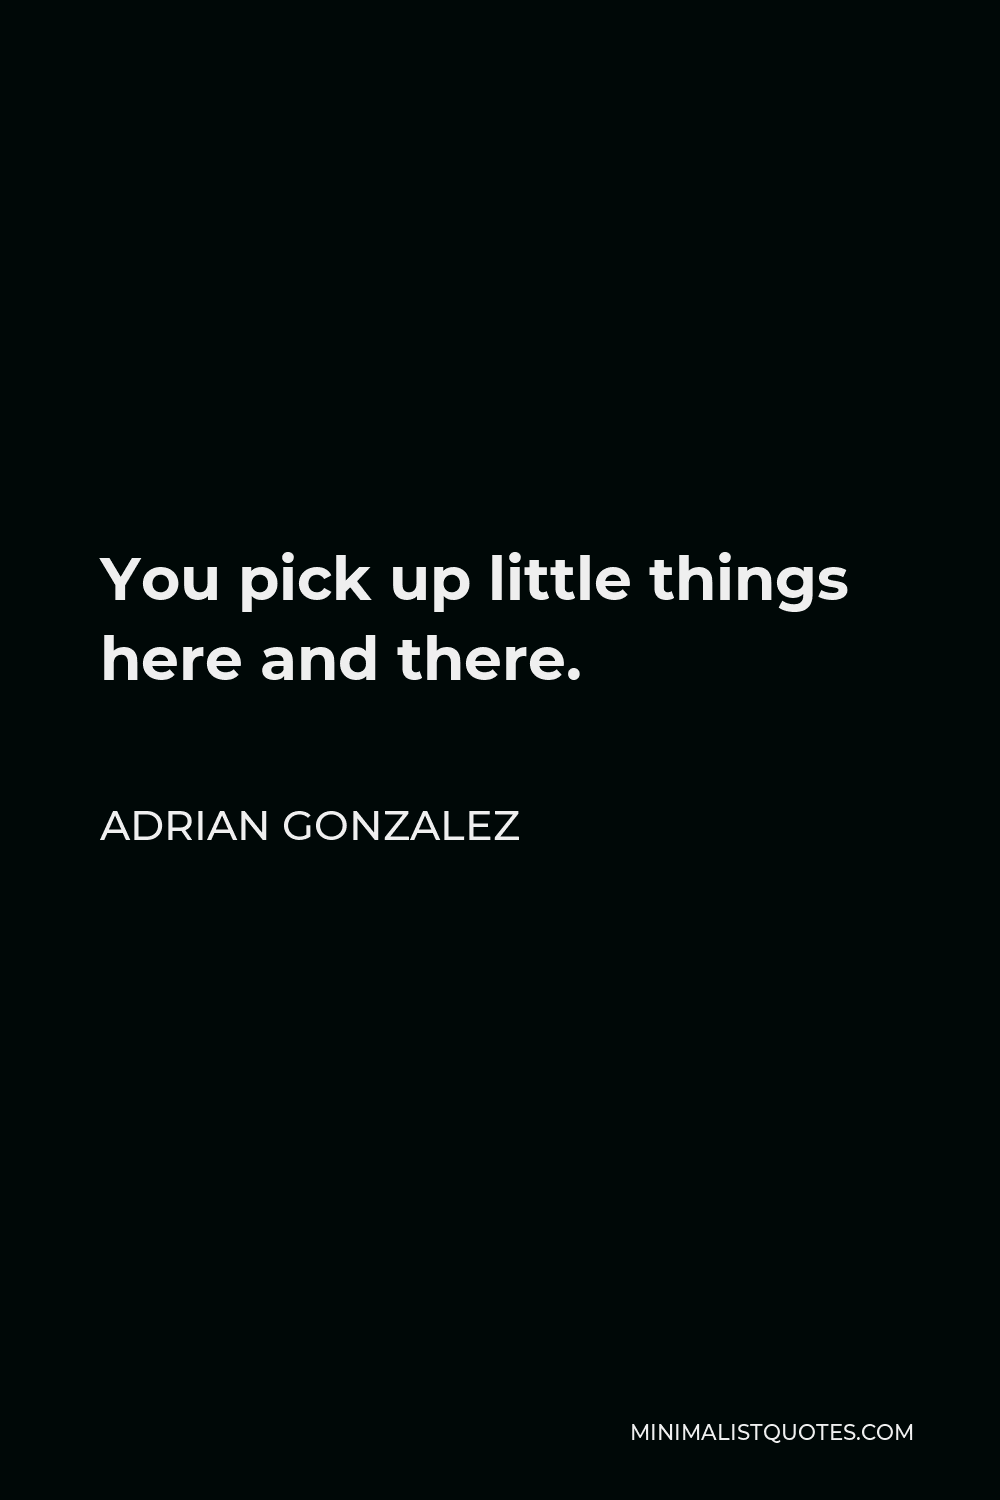 Adrian Gonzalez Quote - You pick up little things here and there.